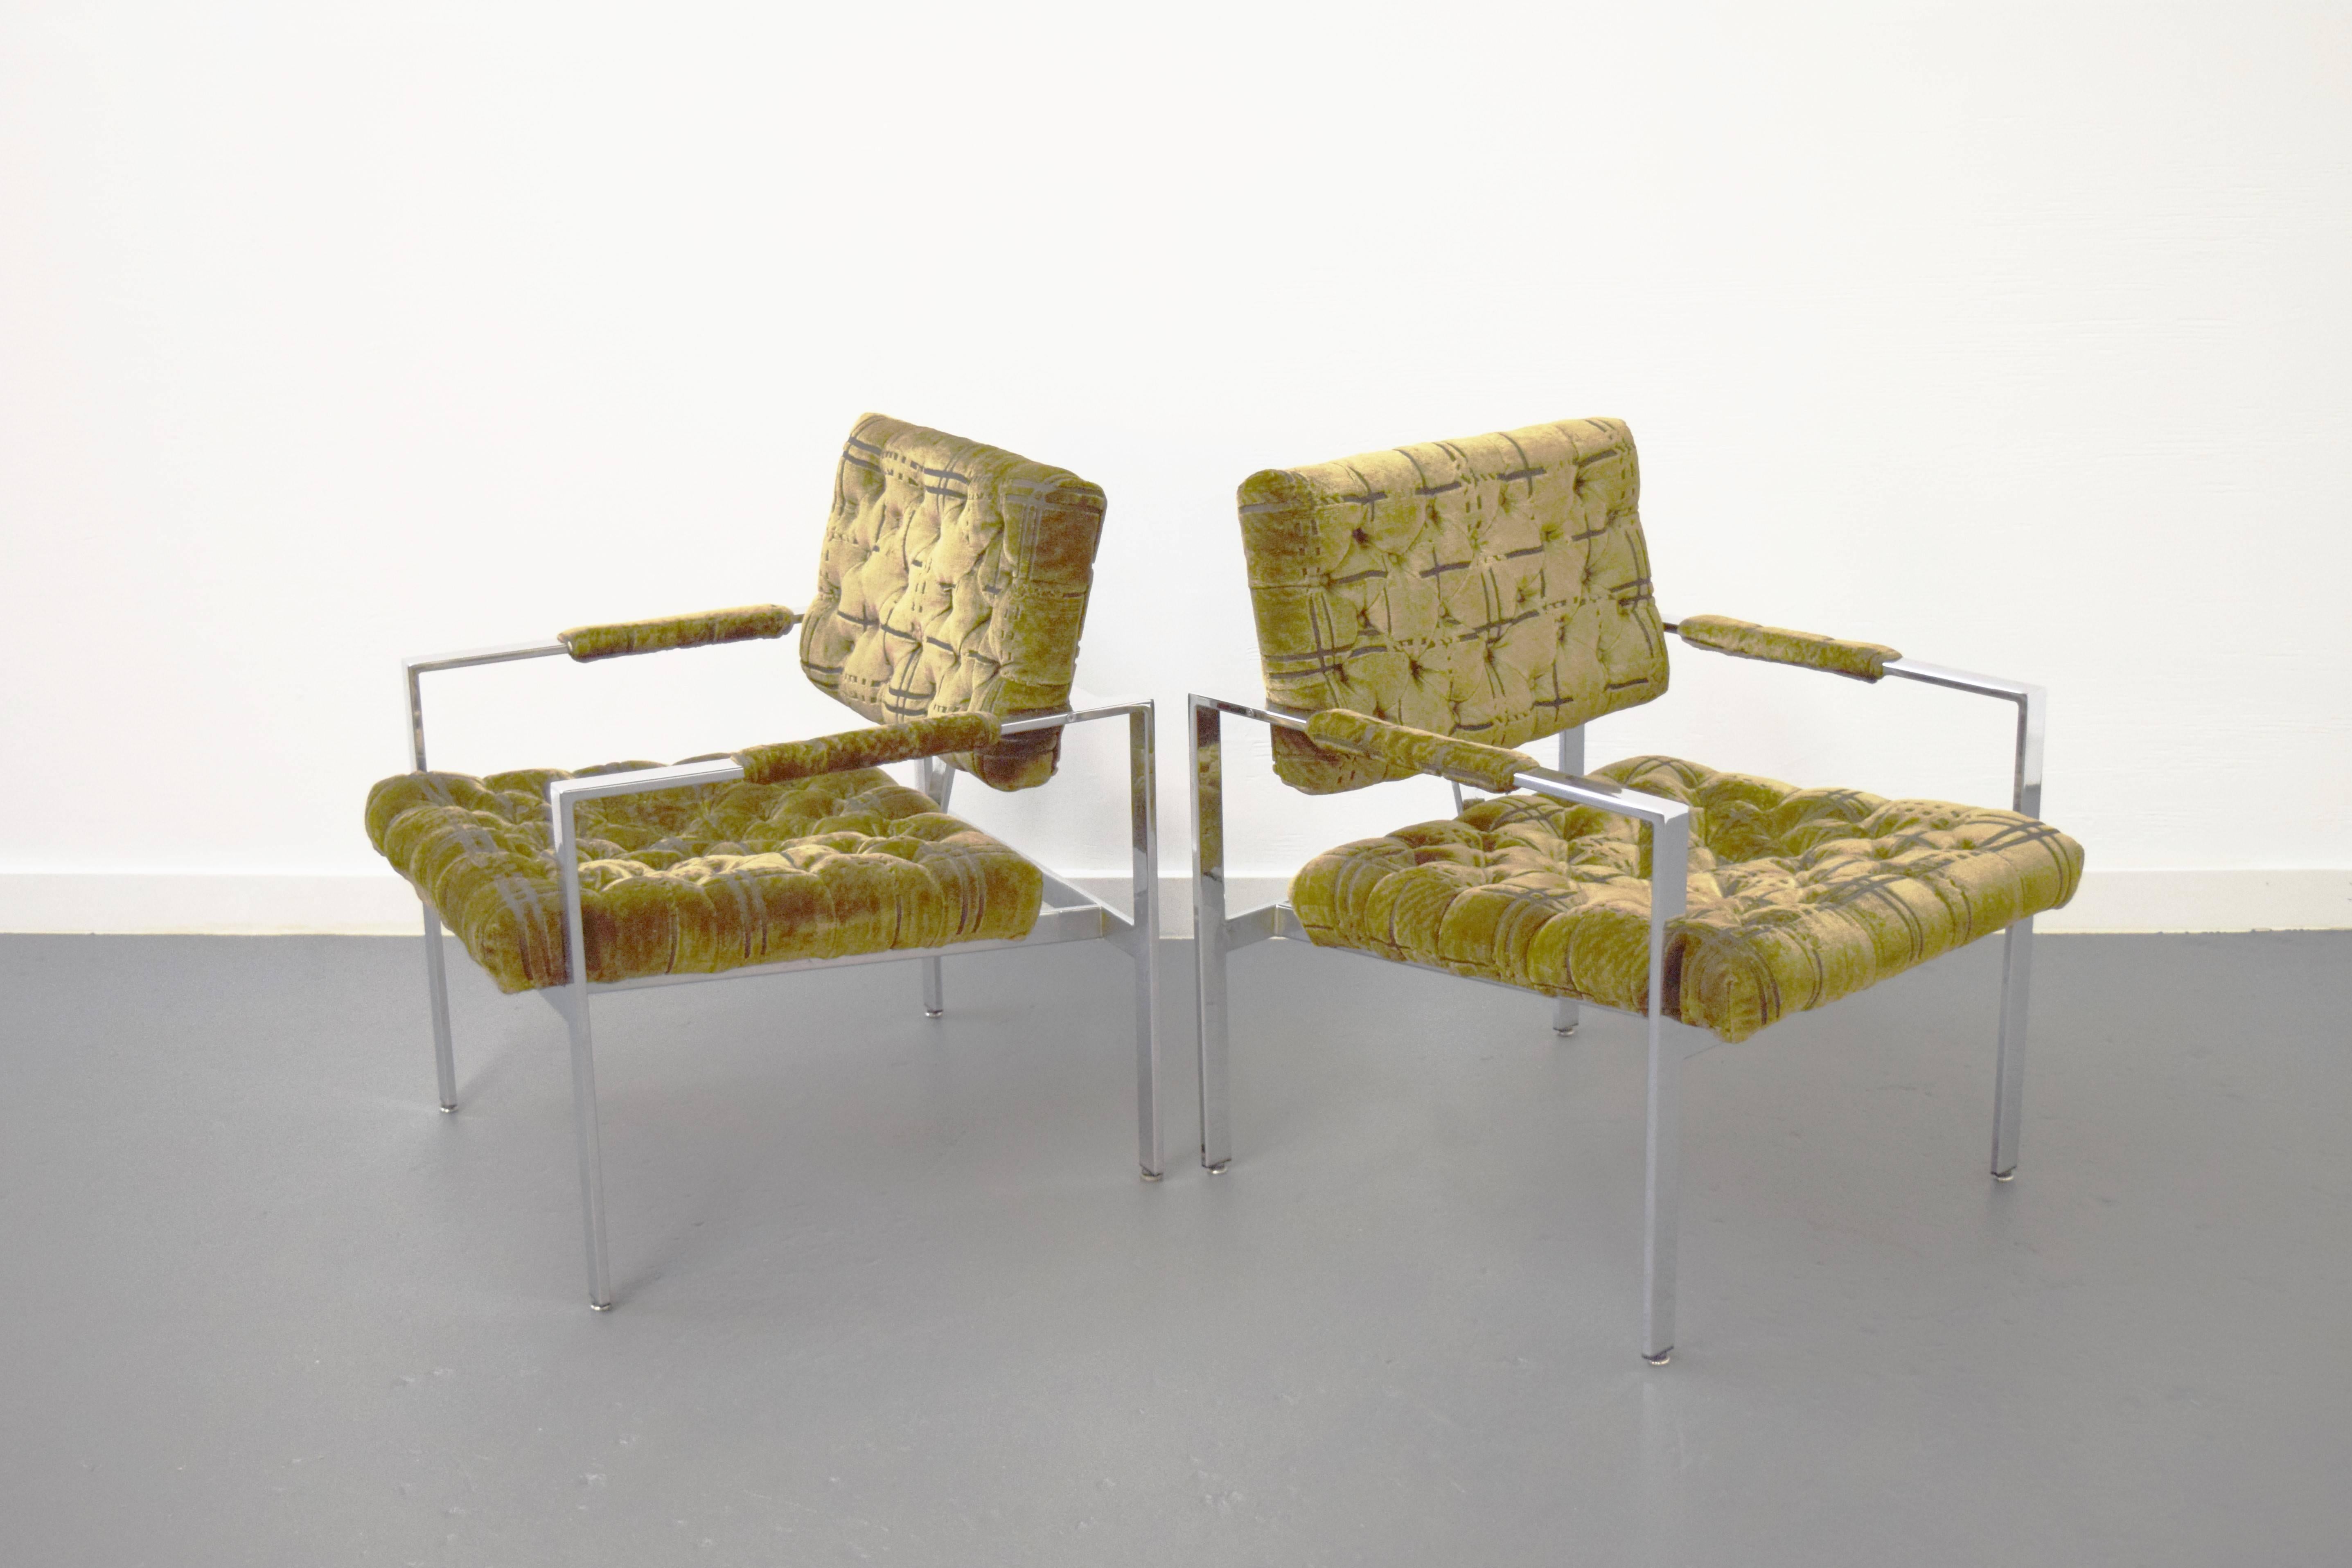 Pair of Milo Baughman for Thayer Coggin tufted chrome lounge chairs.